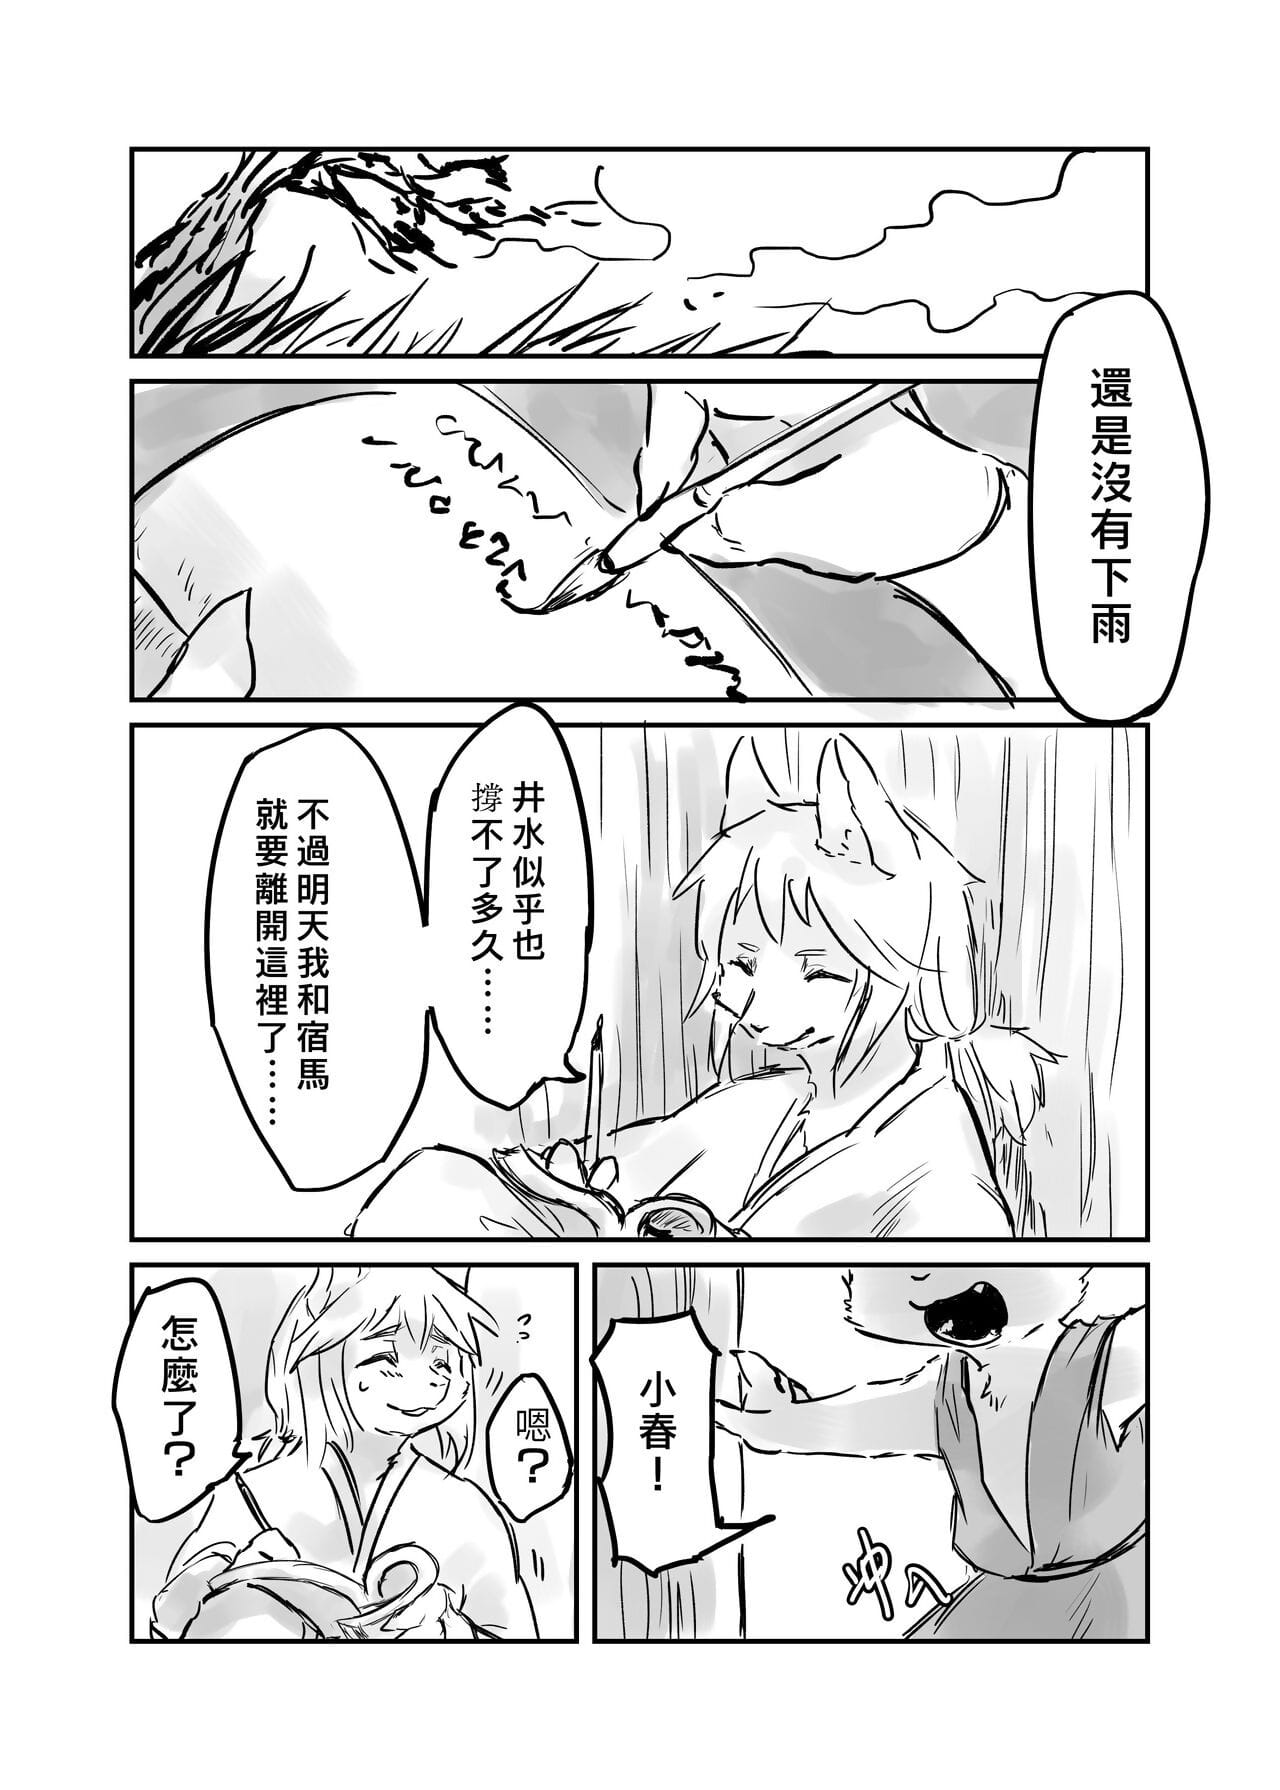 （The visitor 他乡之人 by：鬼流 - part 2 page 1